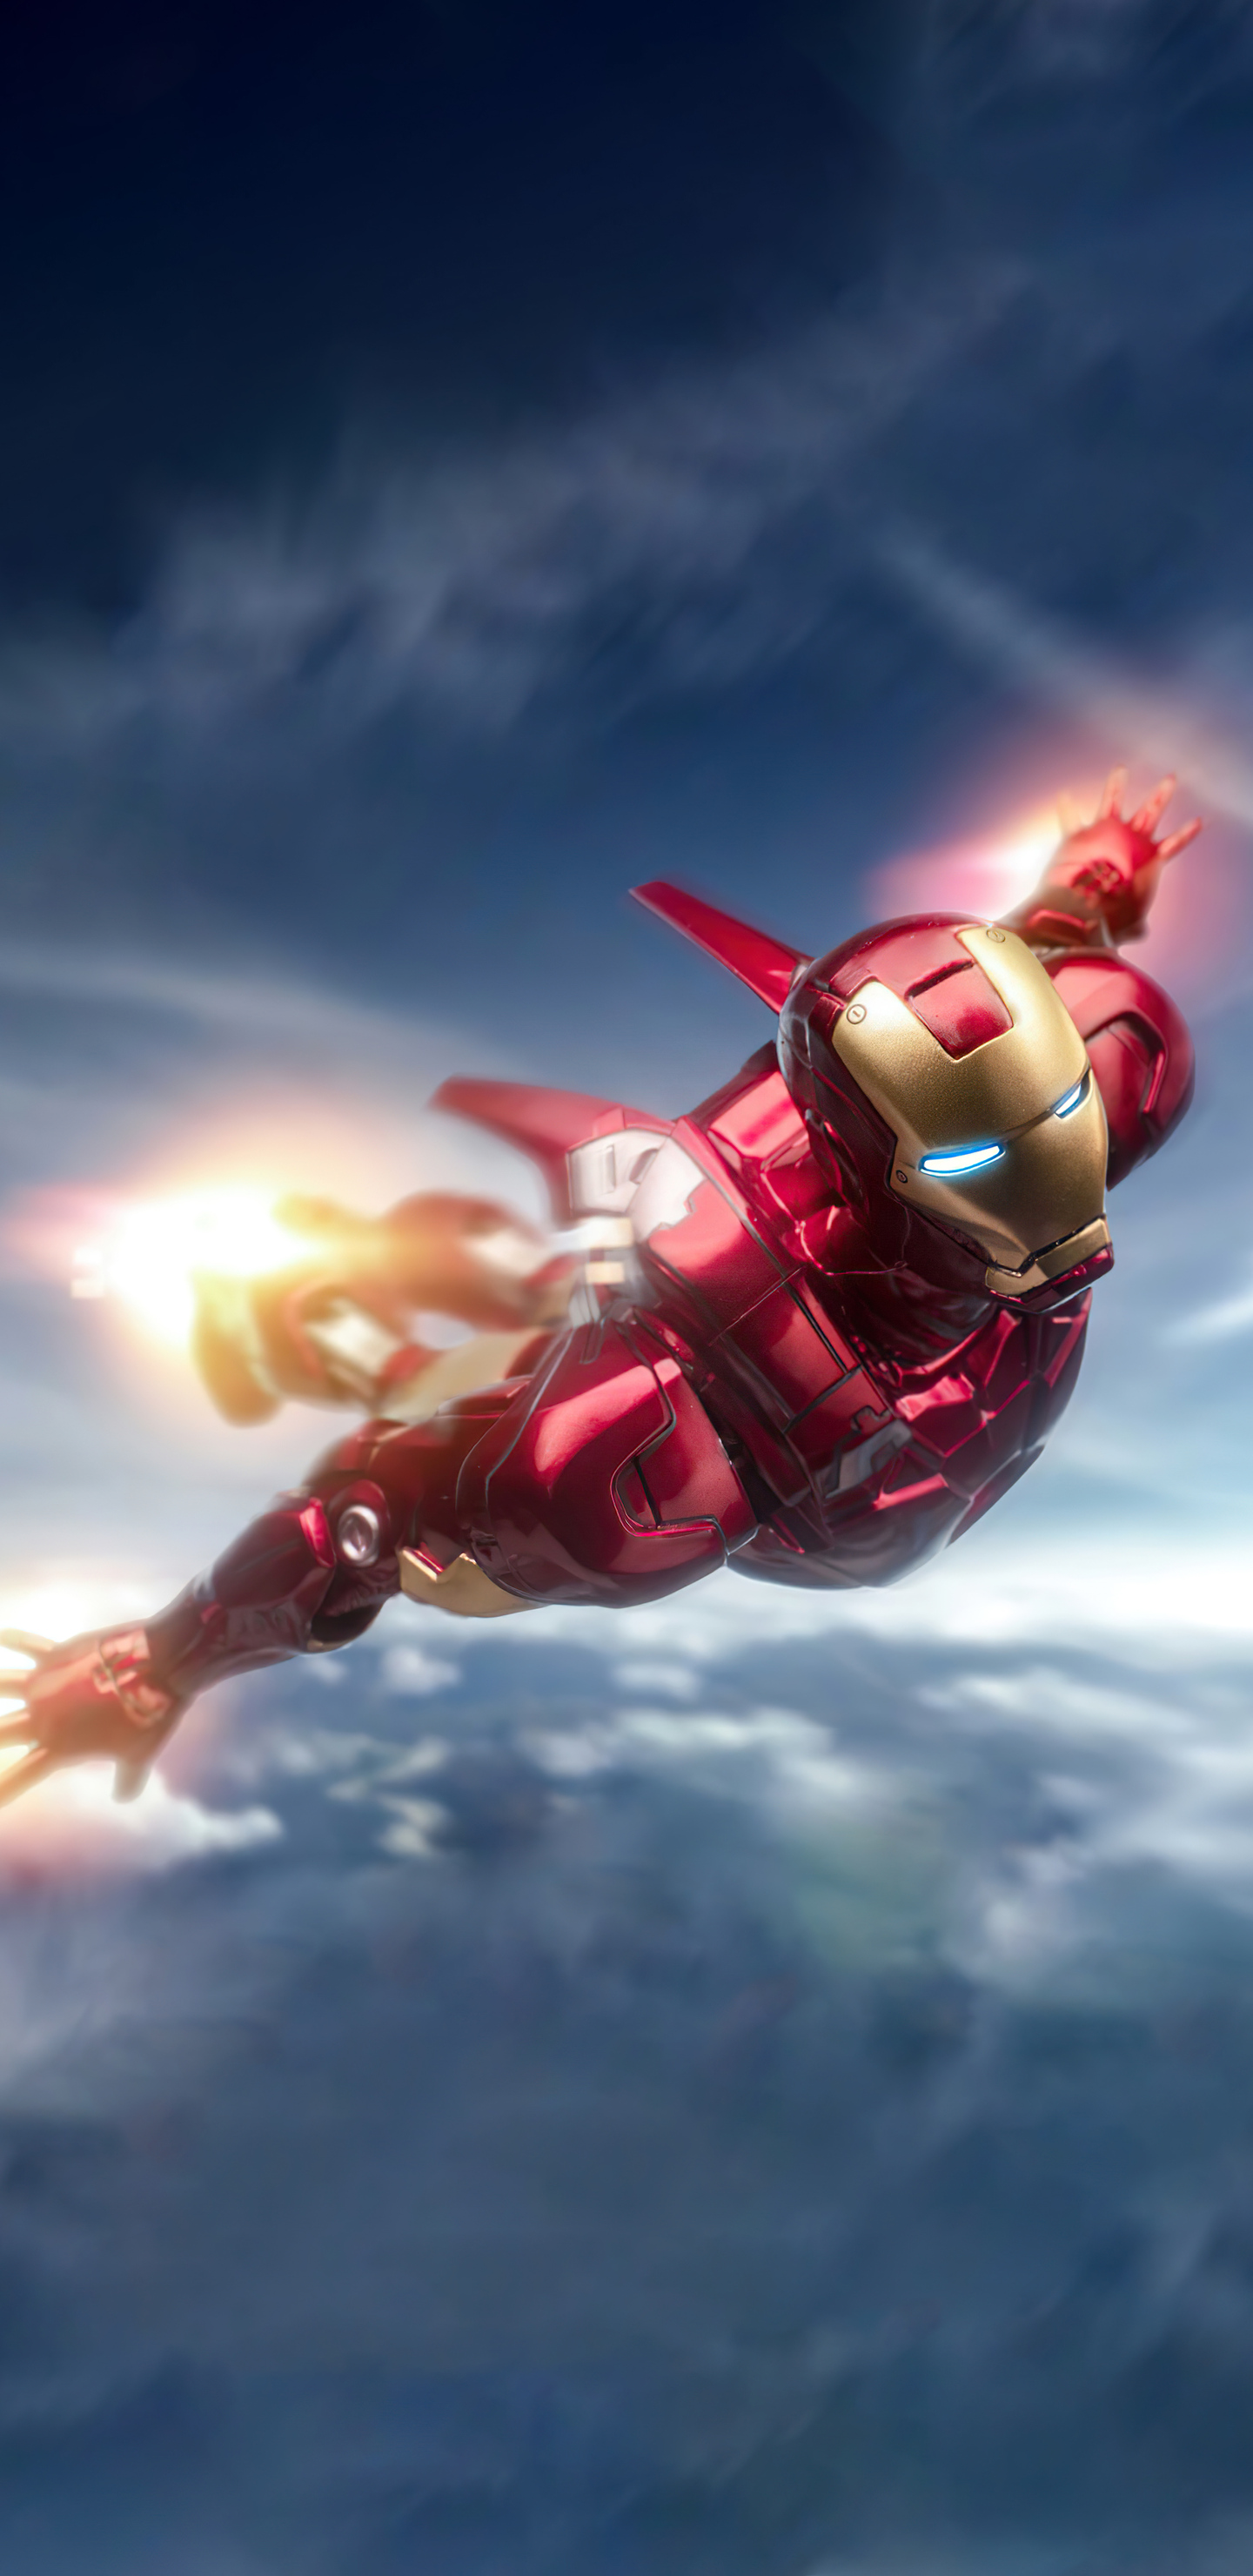 1440x2960 Iron Man Flying 5k Samsung Galaxy Note 9,8, S9,S8,S8+ QHD HD 4k  Wallpapers, Images, Backgrounds, Photos and Pictures